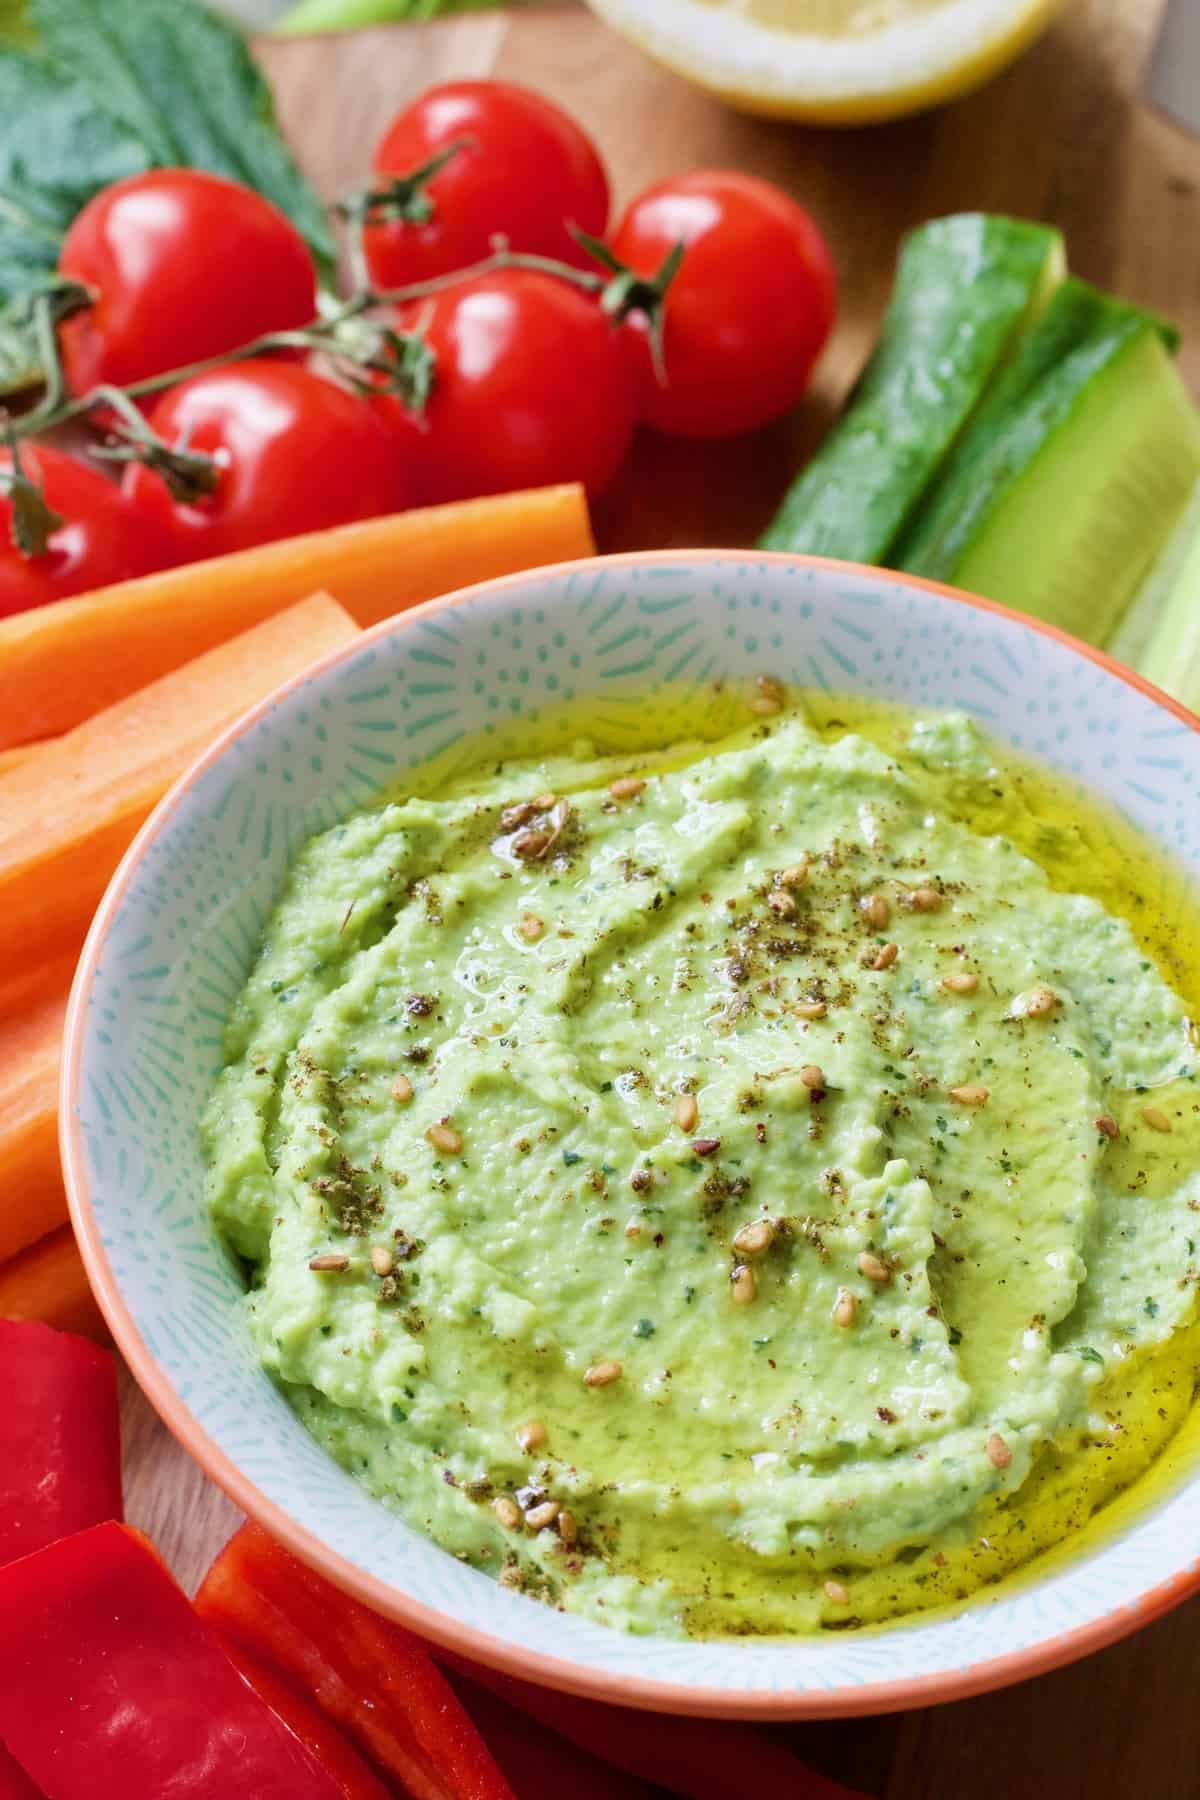 Broad bean dip in a bowl with olive oil and zaatar sprinkle.